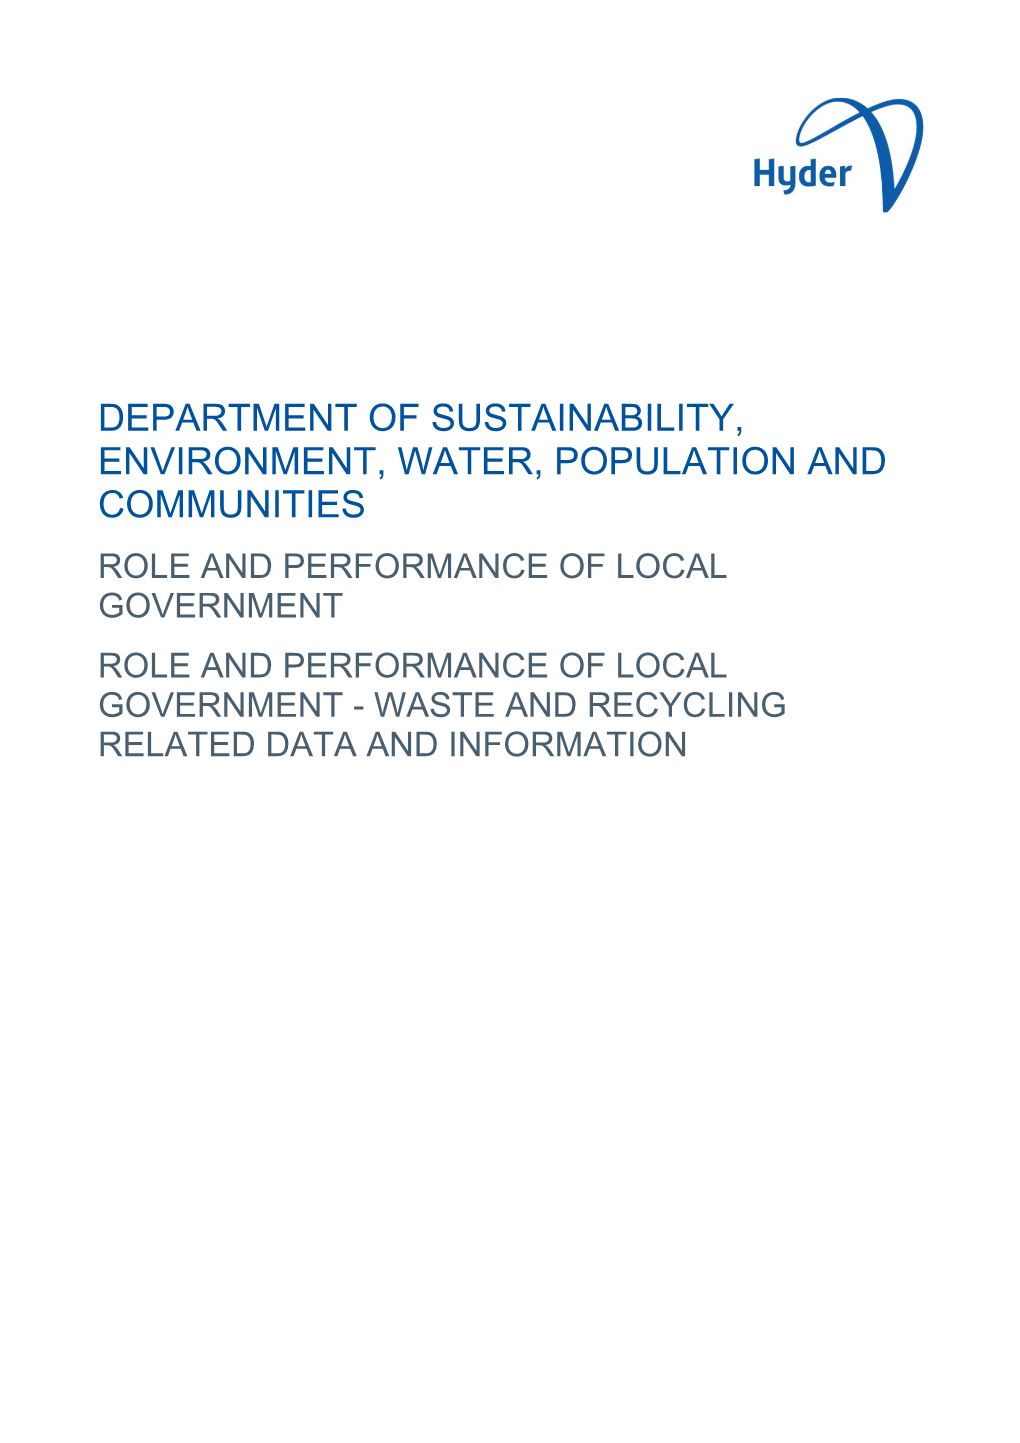 Role and Performance of Local Government - Waste and Recycling Related Data and Information